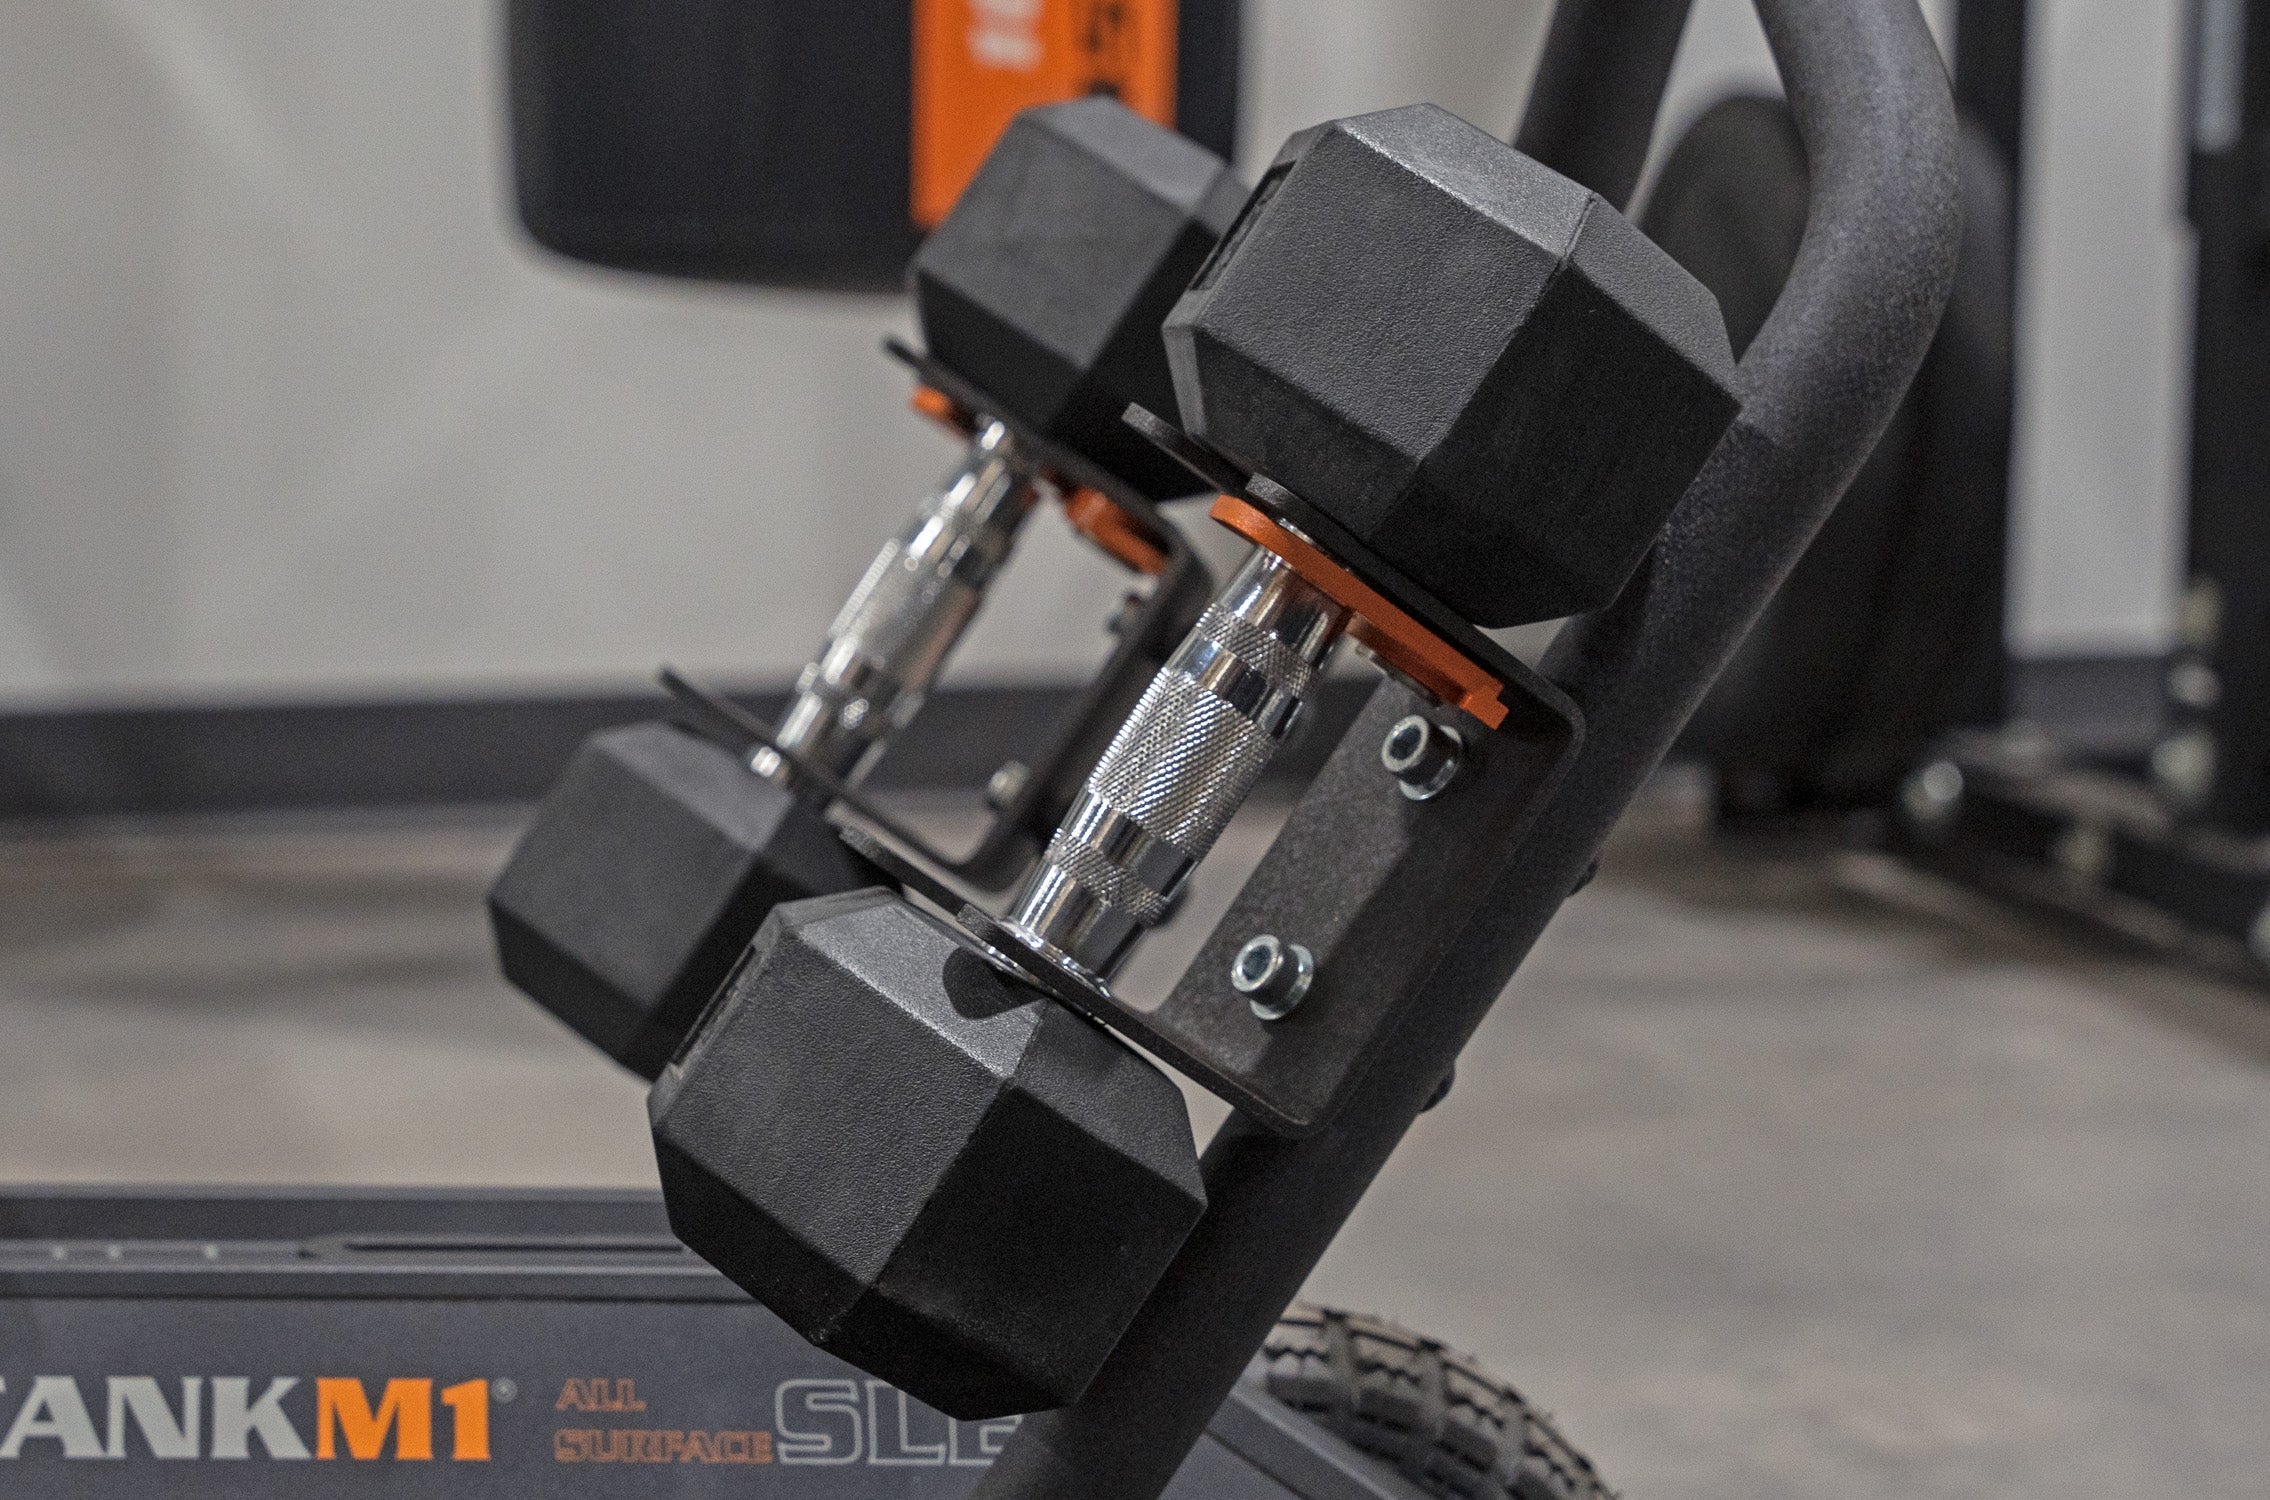 Dumbbell Cradle Option adds Traction and Storage